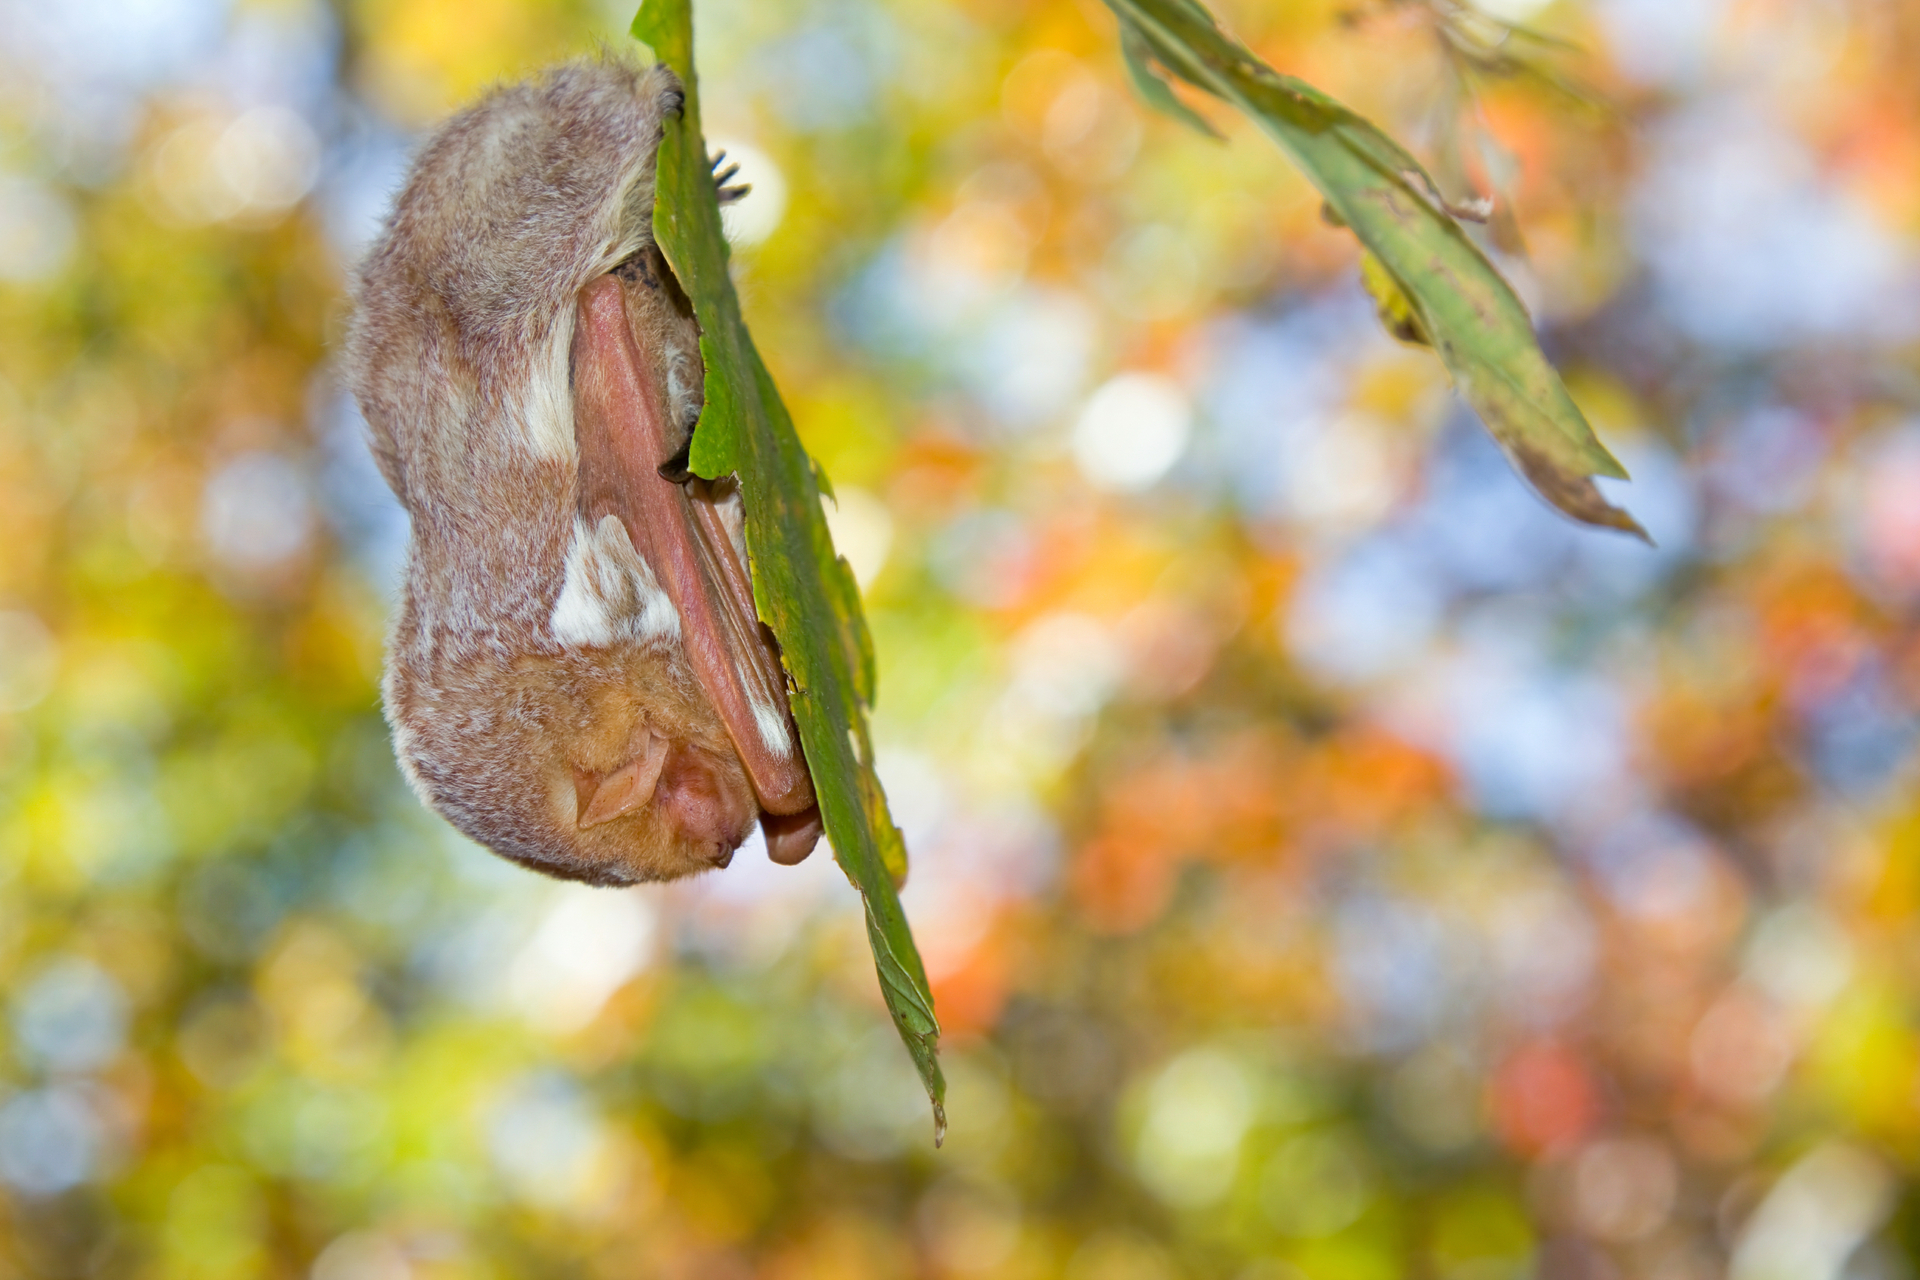 A bat hanging from a leaf with its wings and head tucked under it.